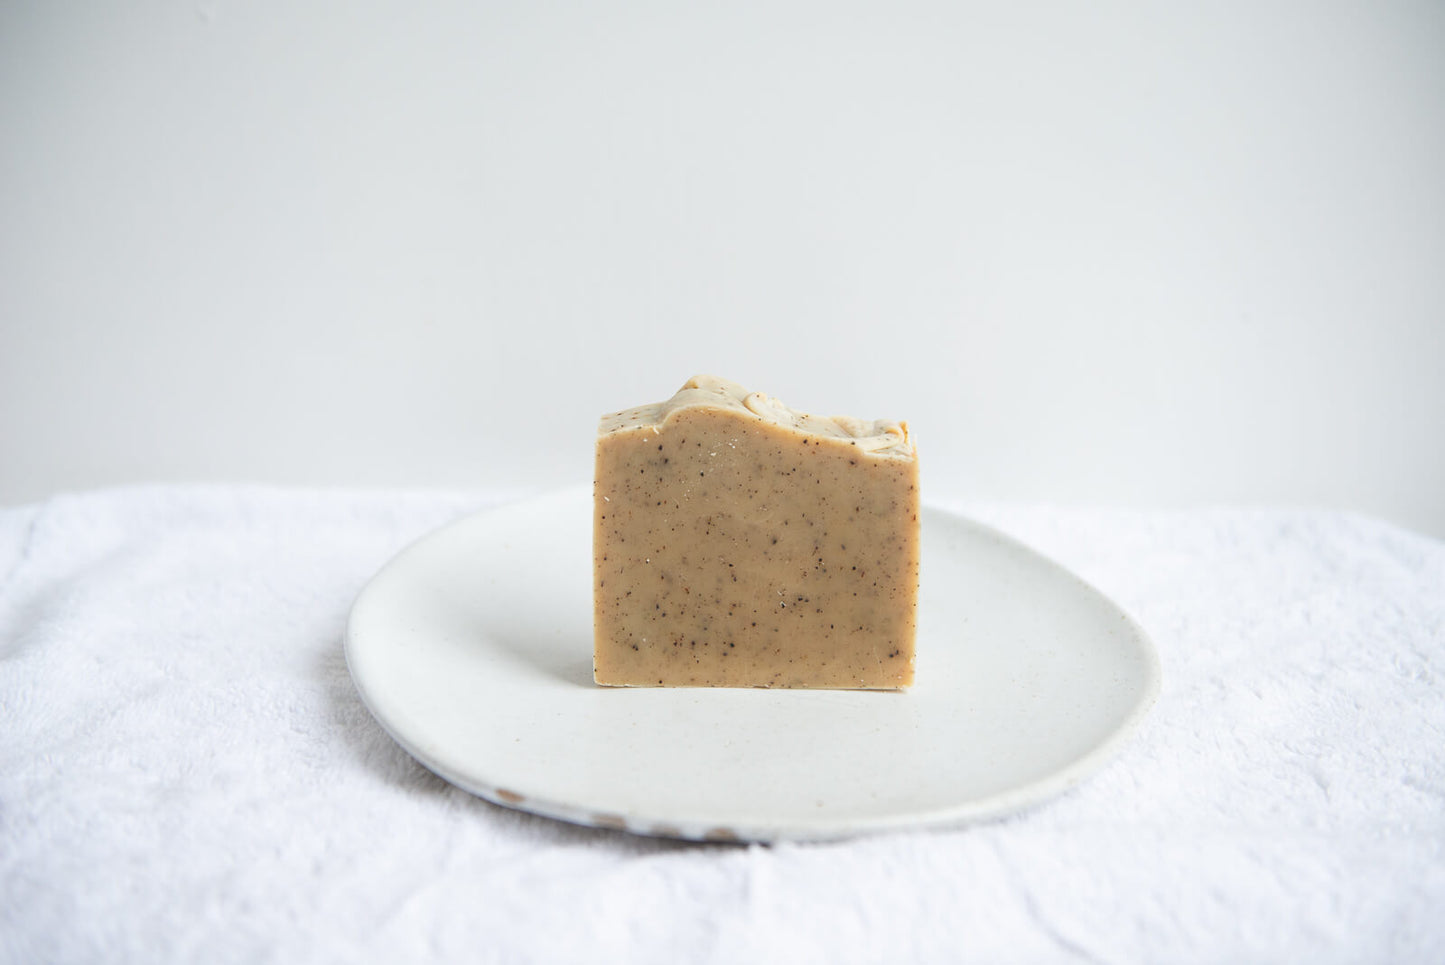 This handmade natural soap with  Lemon Myrtle & Mountain Pepper Leaf deeply nourishes your skin